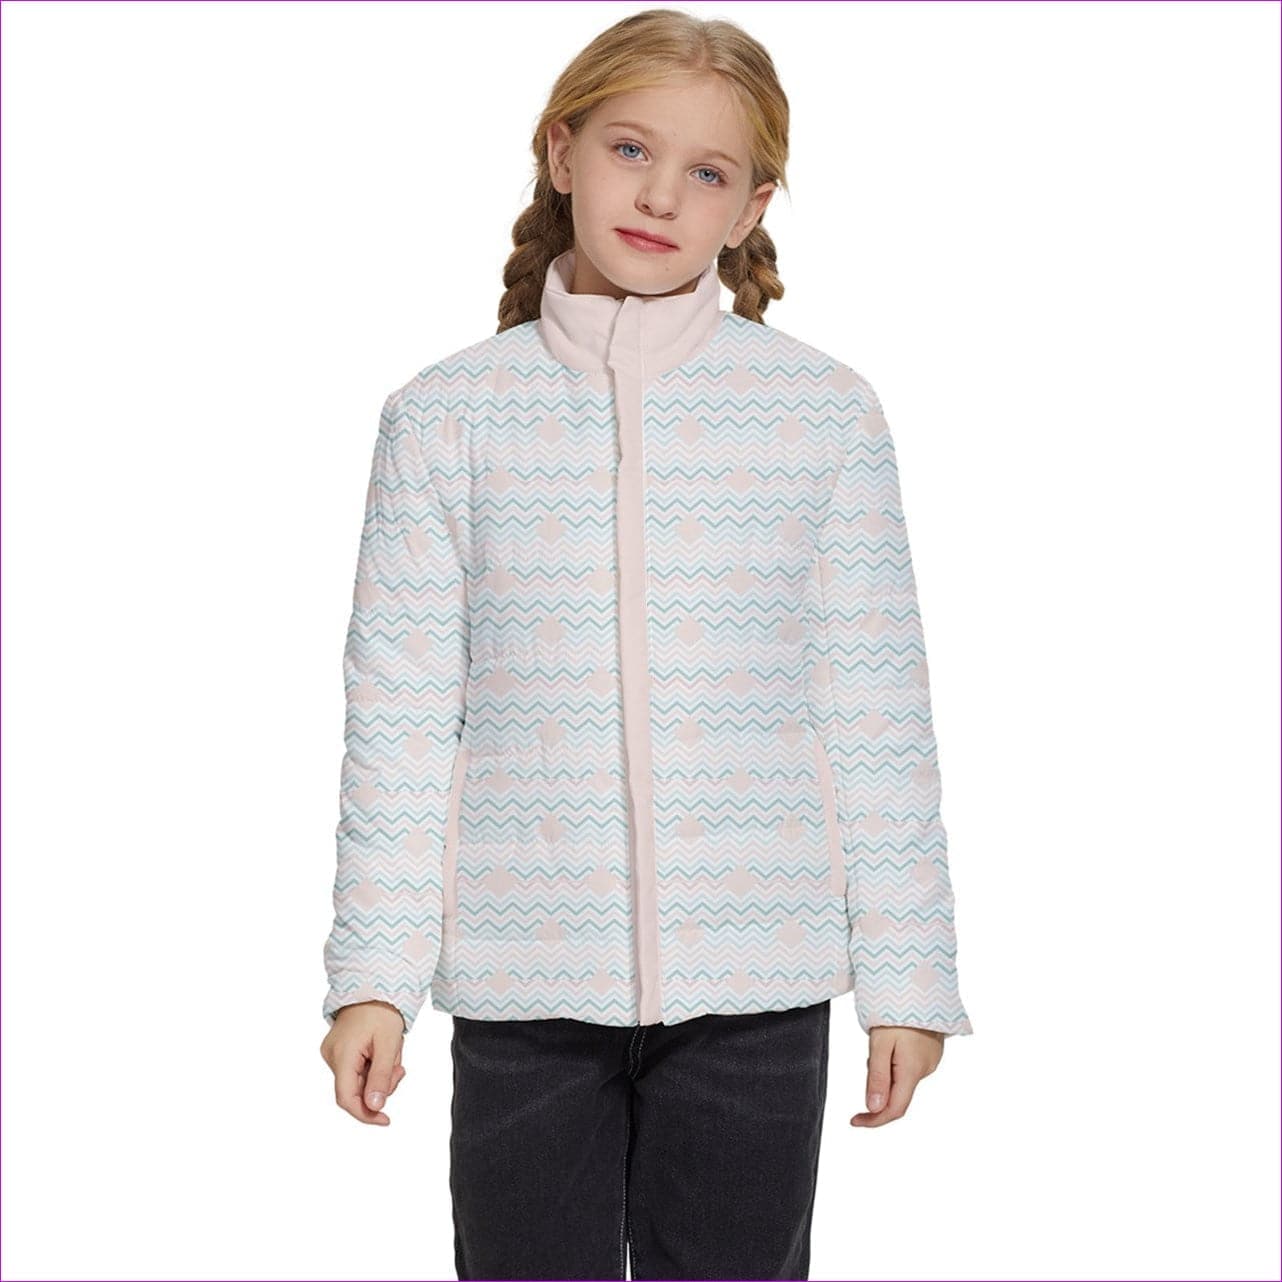 Easy Days Kids Puffer Bubble Jacket Coat - kid's coat at TFC&H Co.